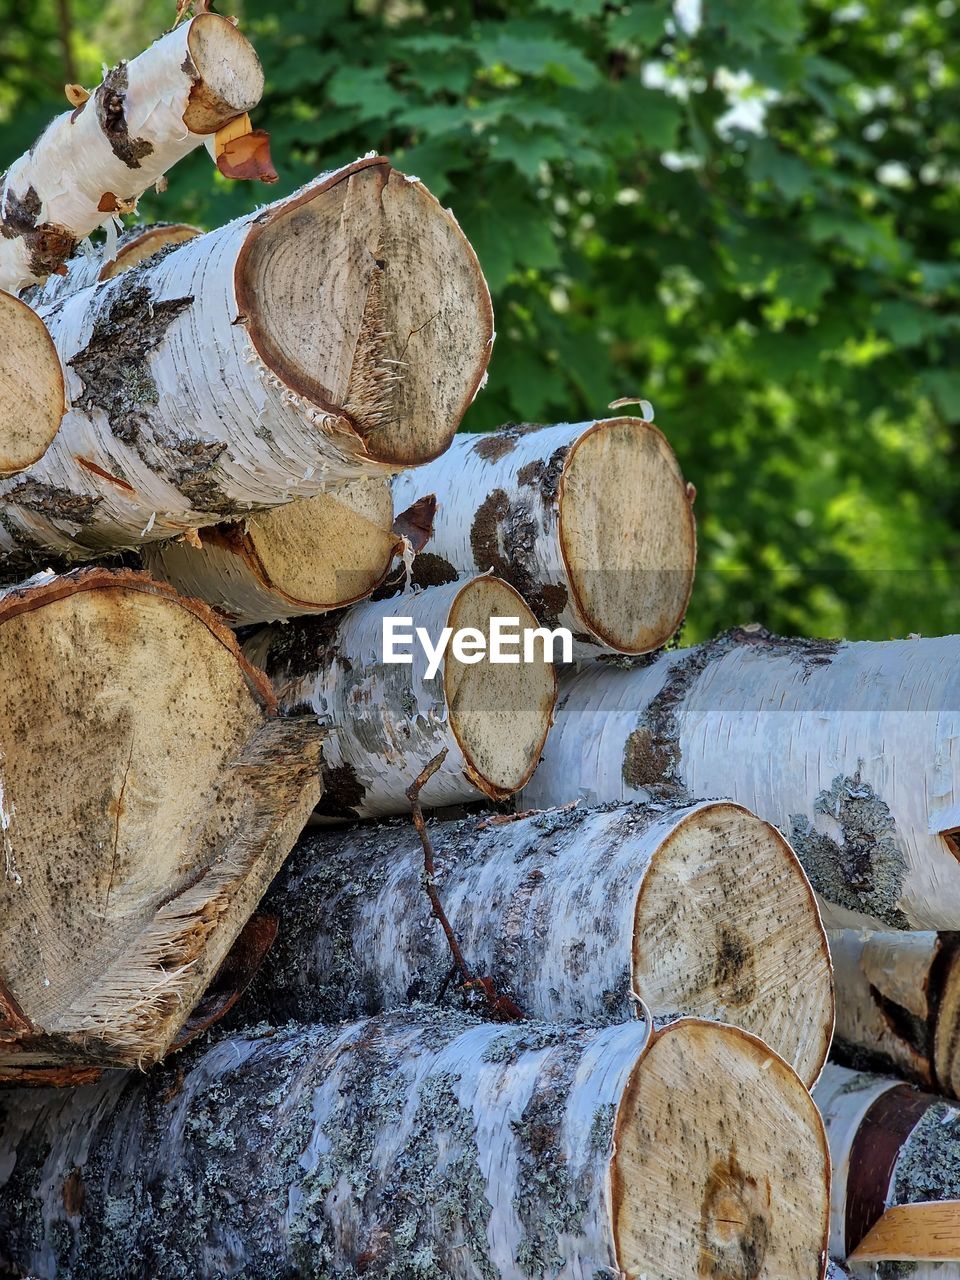 tree, day, log, nature, forest, wood, deforestation, firewood, large group of objects, timber, trunk, plant, lumber industry, no people, outdoors, land, abundance, environmental issues, field, autumn, leaf, high angle view, close-up, logging